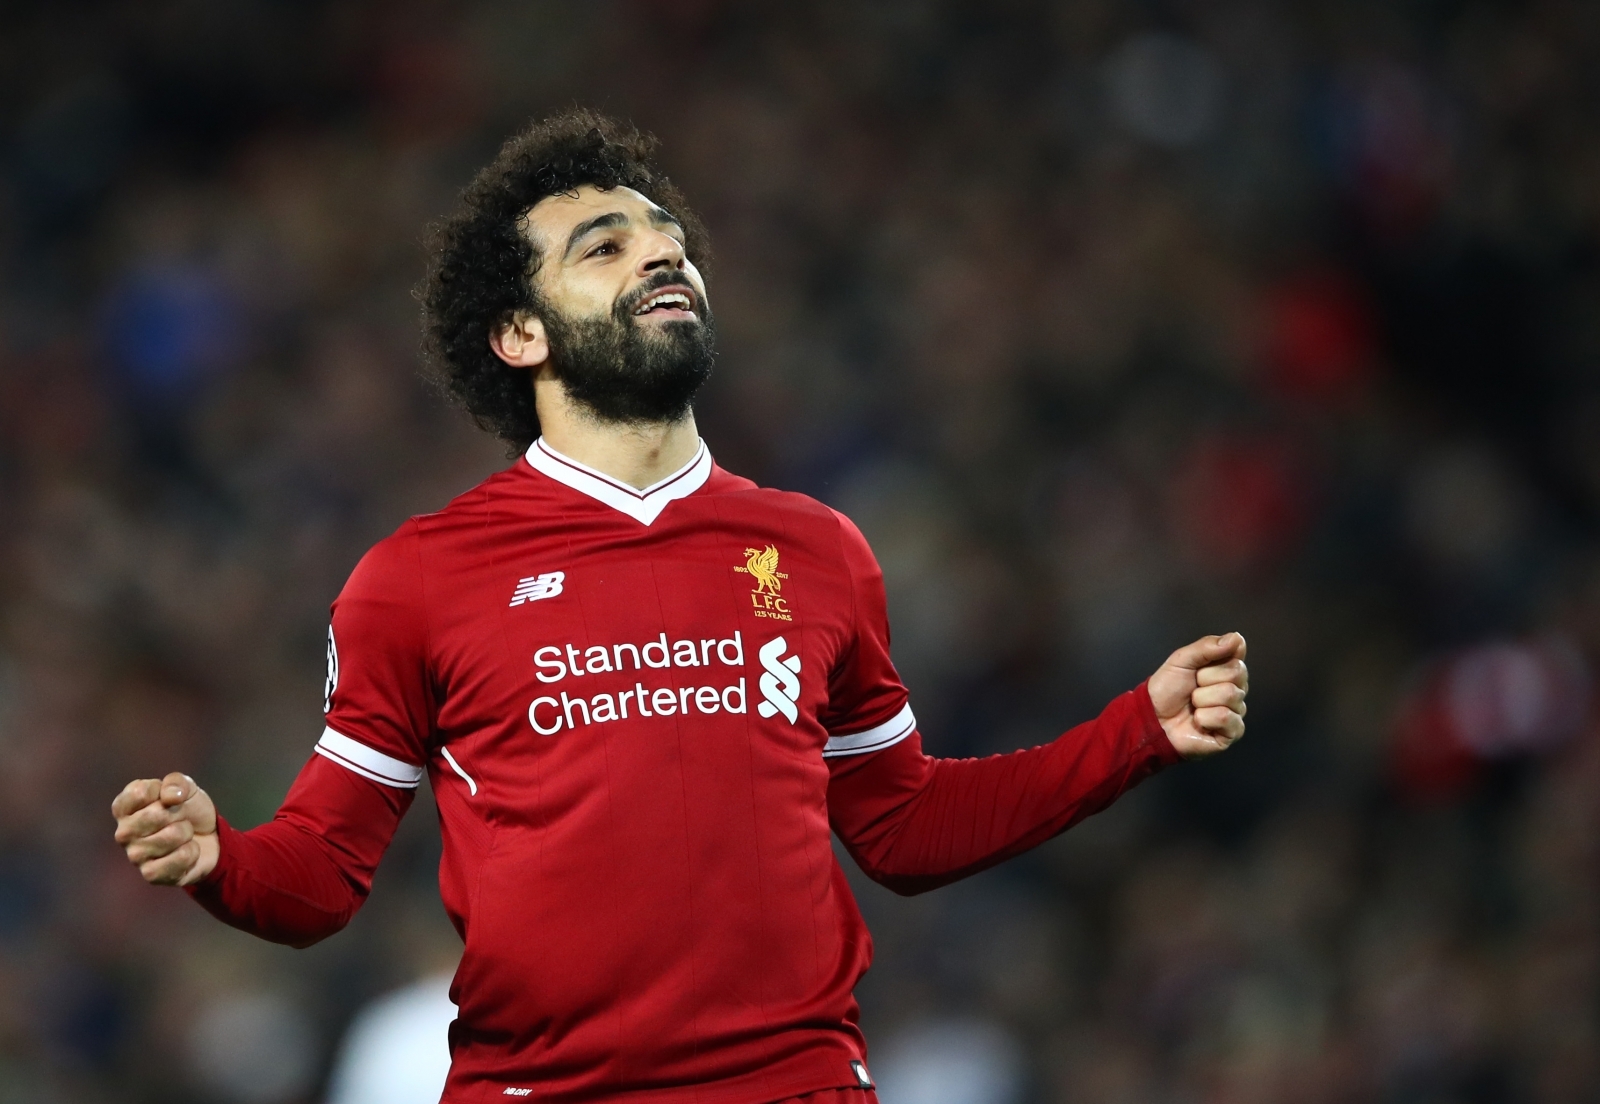 Mohamed Salah: Liverpool star named BBC African Footballer of the Year ahead of Sadio Mane and